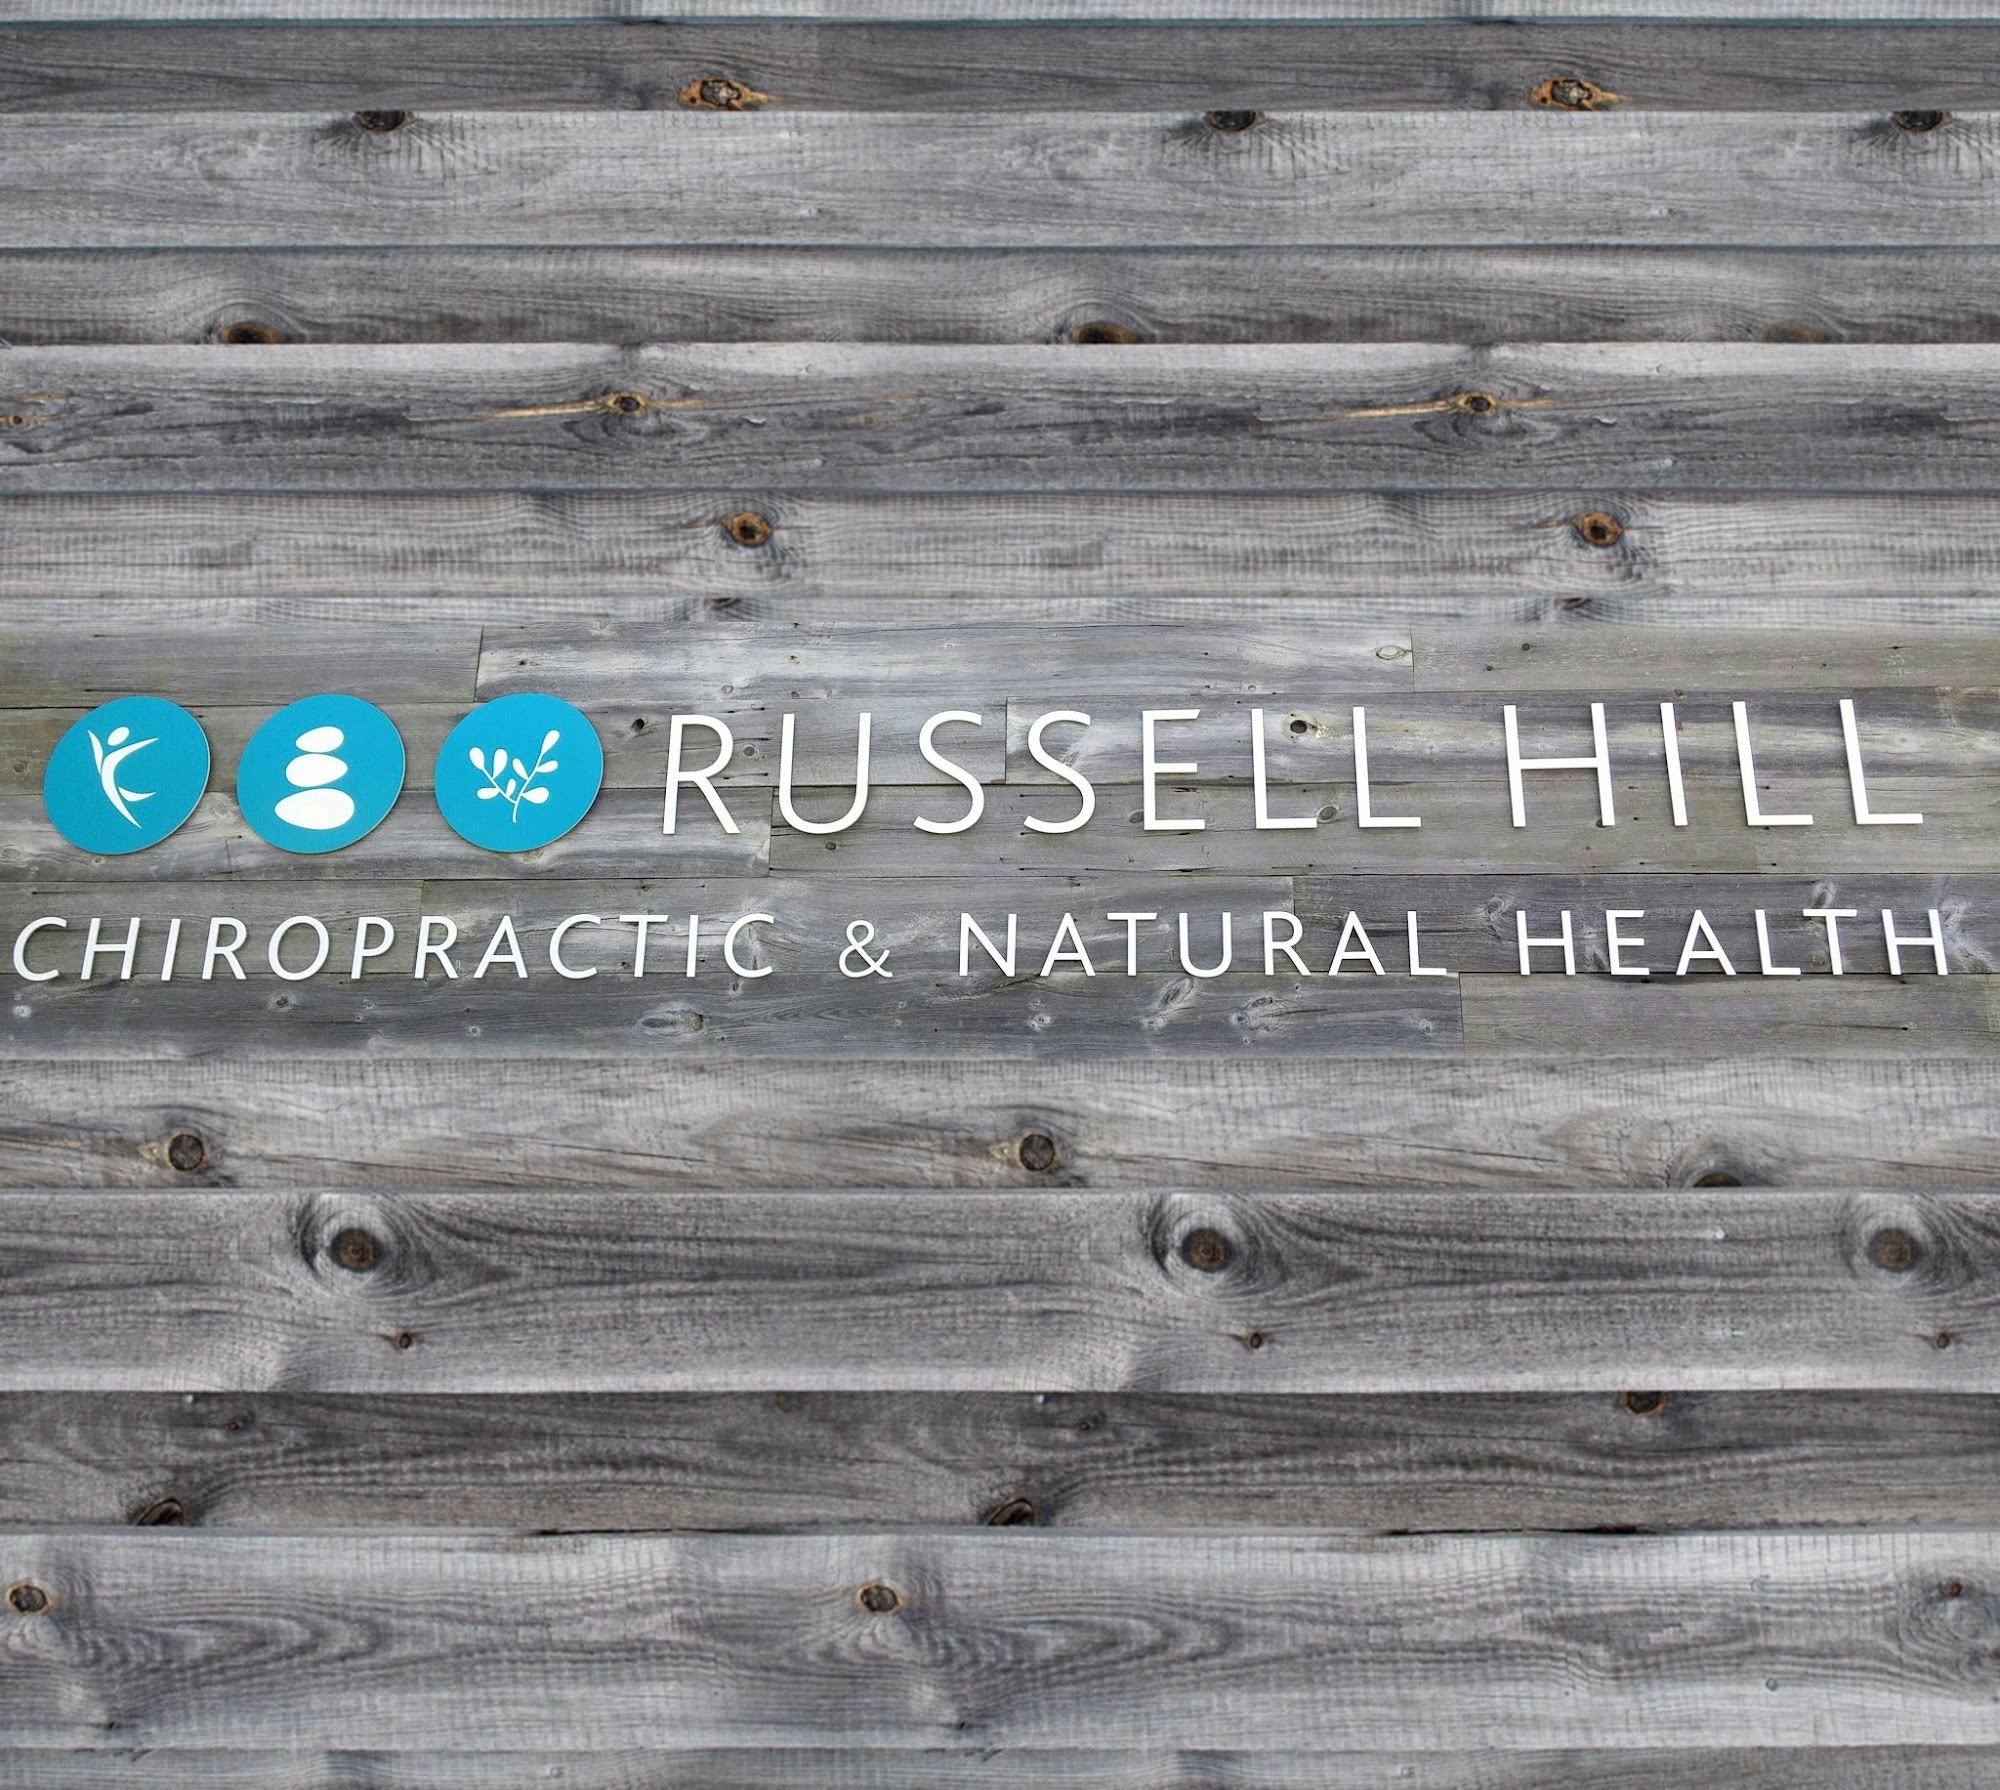 Russell Hill Chiropractic & Natural Health